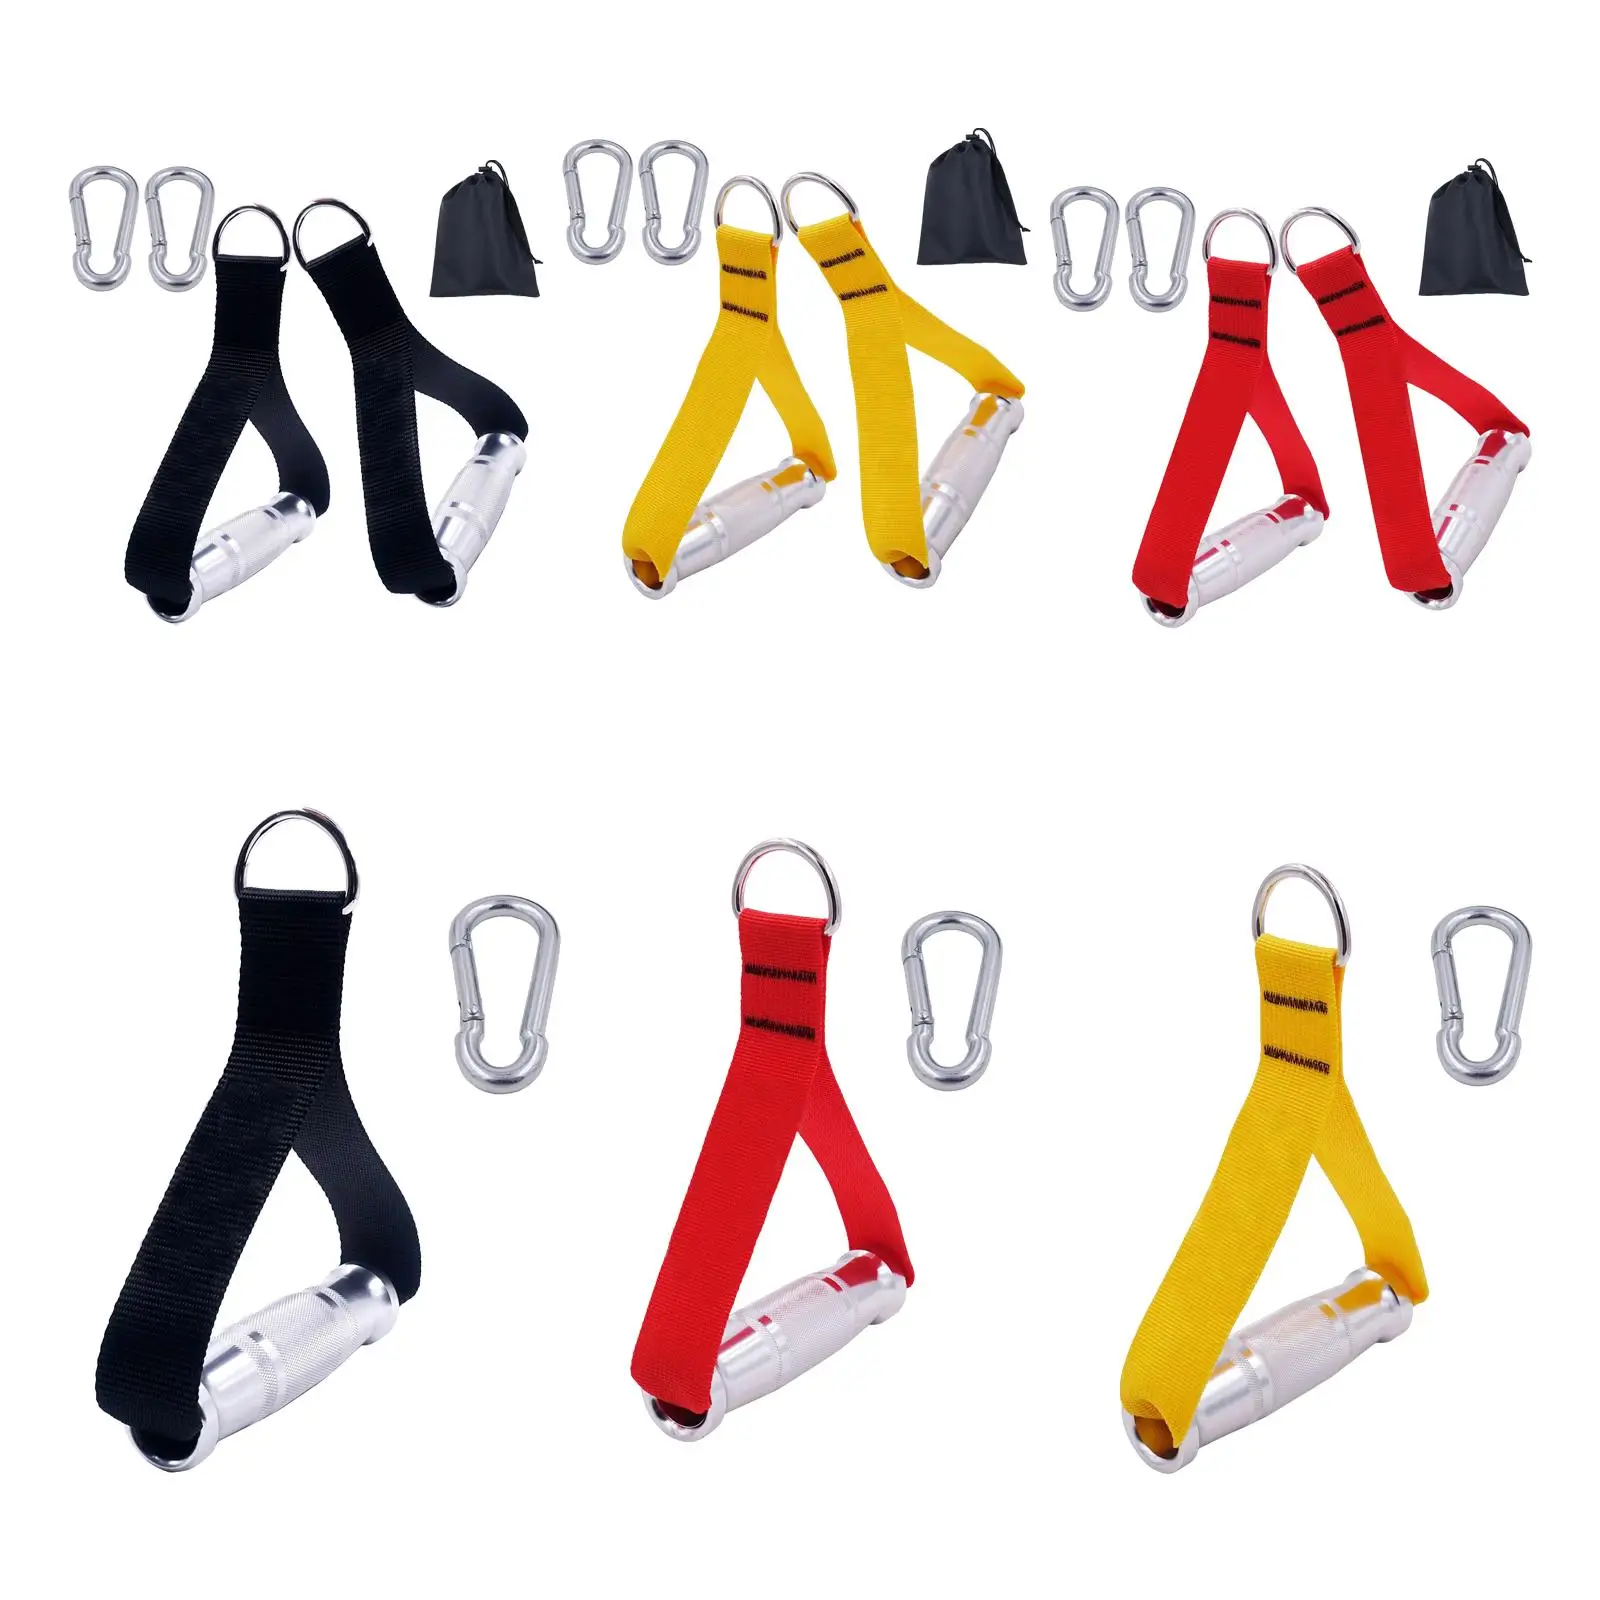 Strong Resistance Bands Nylon Handle Webbing for Fitness Equipment Metal Grips